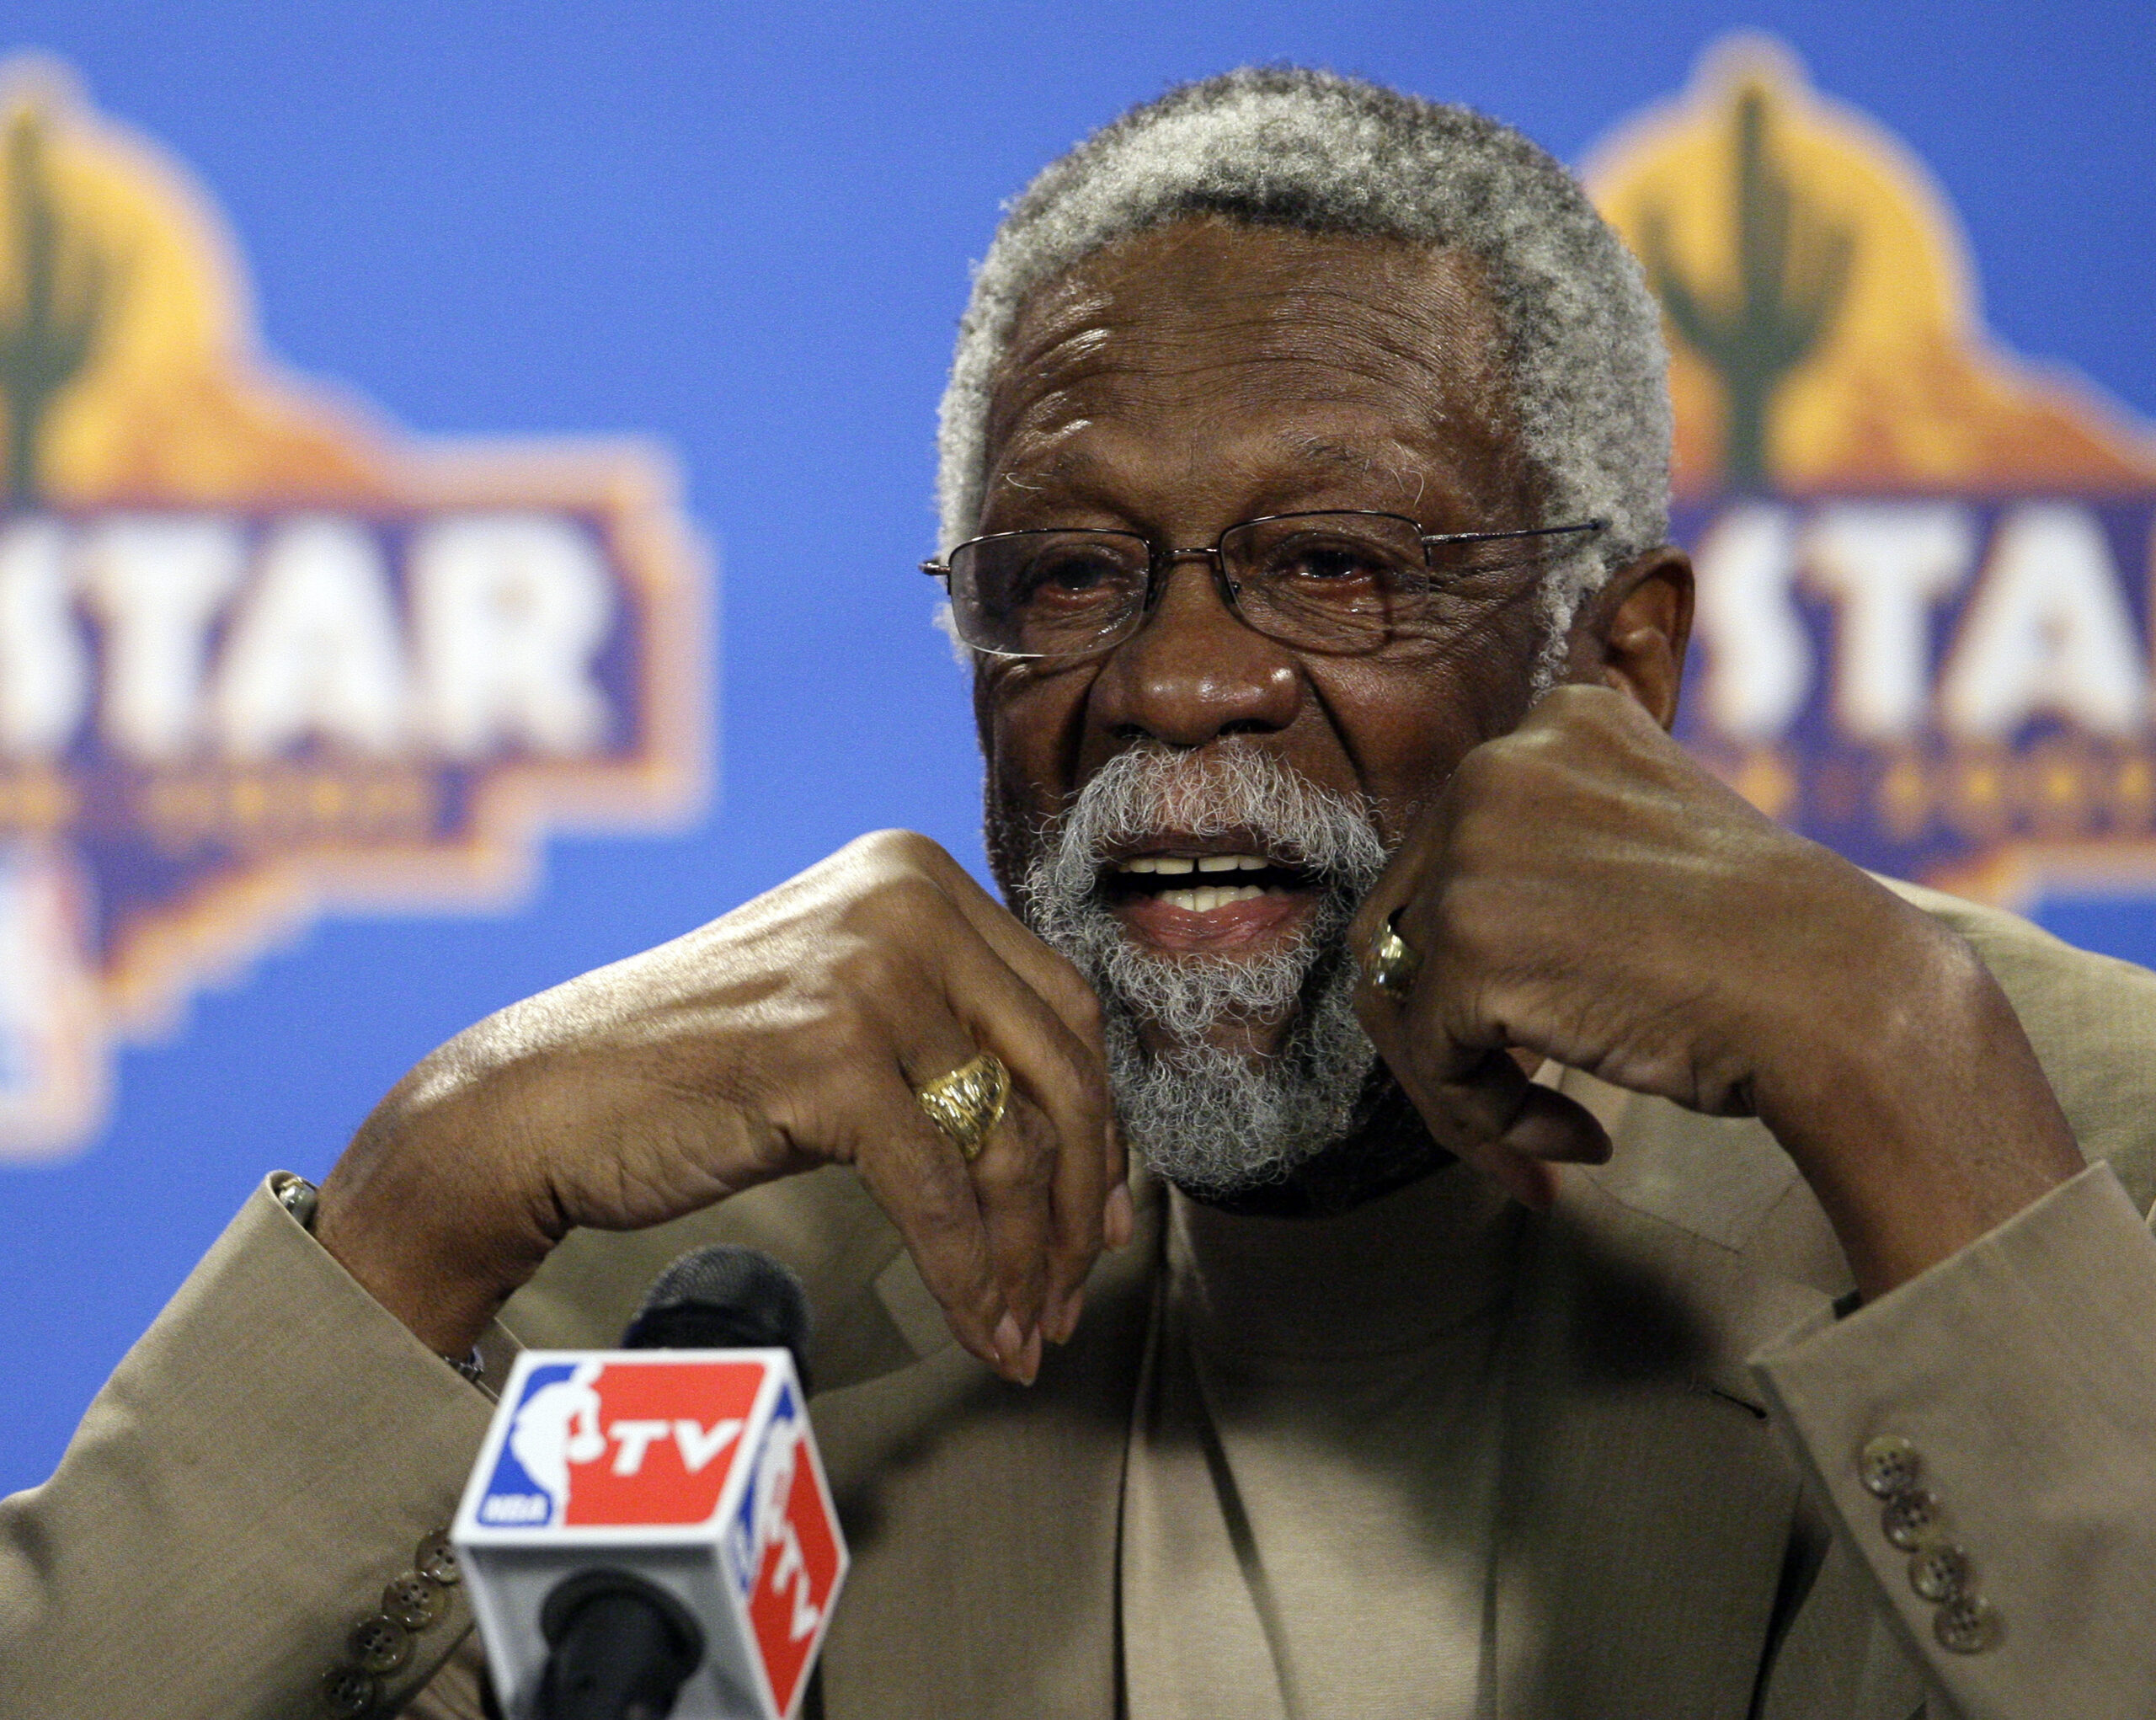 FILE - Former NBA great Bill Russell speaks during a news conference at the NBA All-Star basketball weekend, Feb. 14, 2009, in Phoenix. The NBA great Bill Russell has died at age 88. His family said on social media that Russell died on Sunday, July 31, 2022. Russell anchored a Boston Celtics dynasty that won 11 titles in 13 years. (AP Photo/Matt Slocum, file)